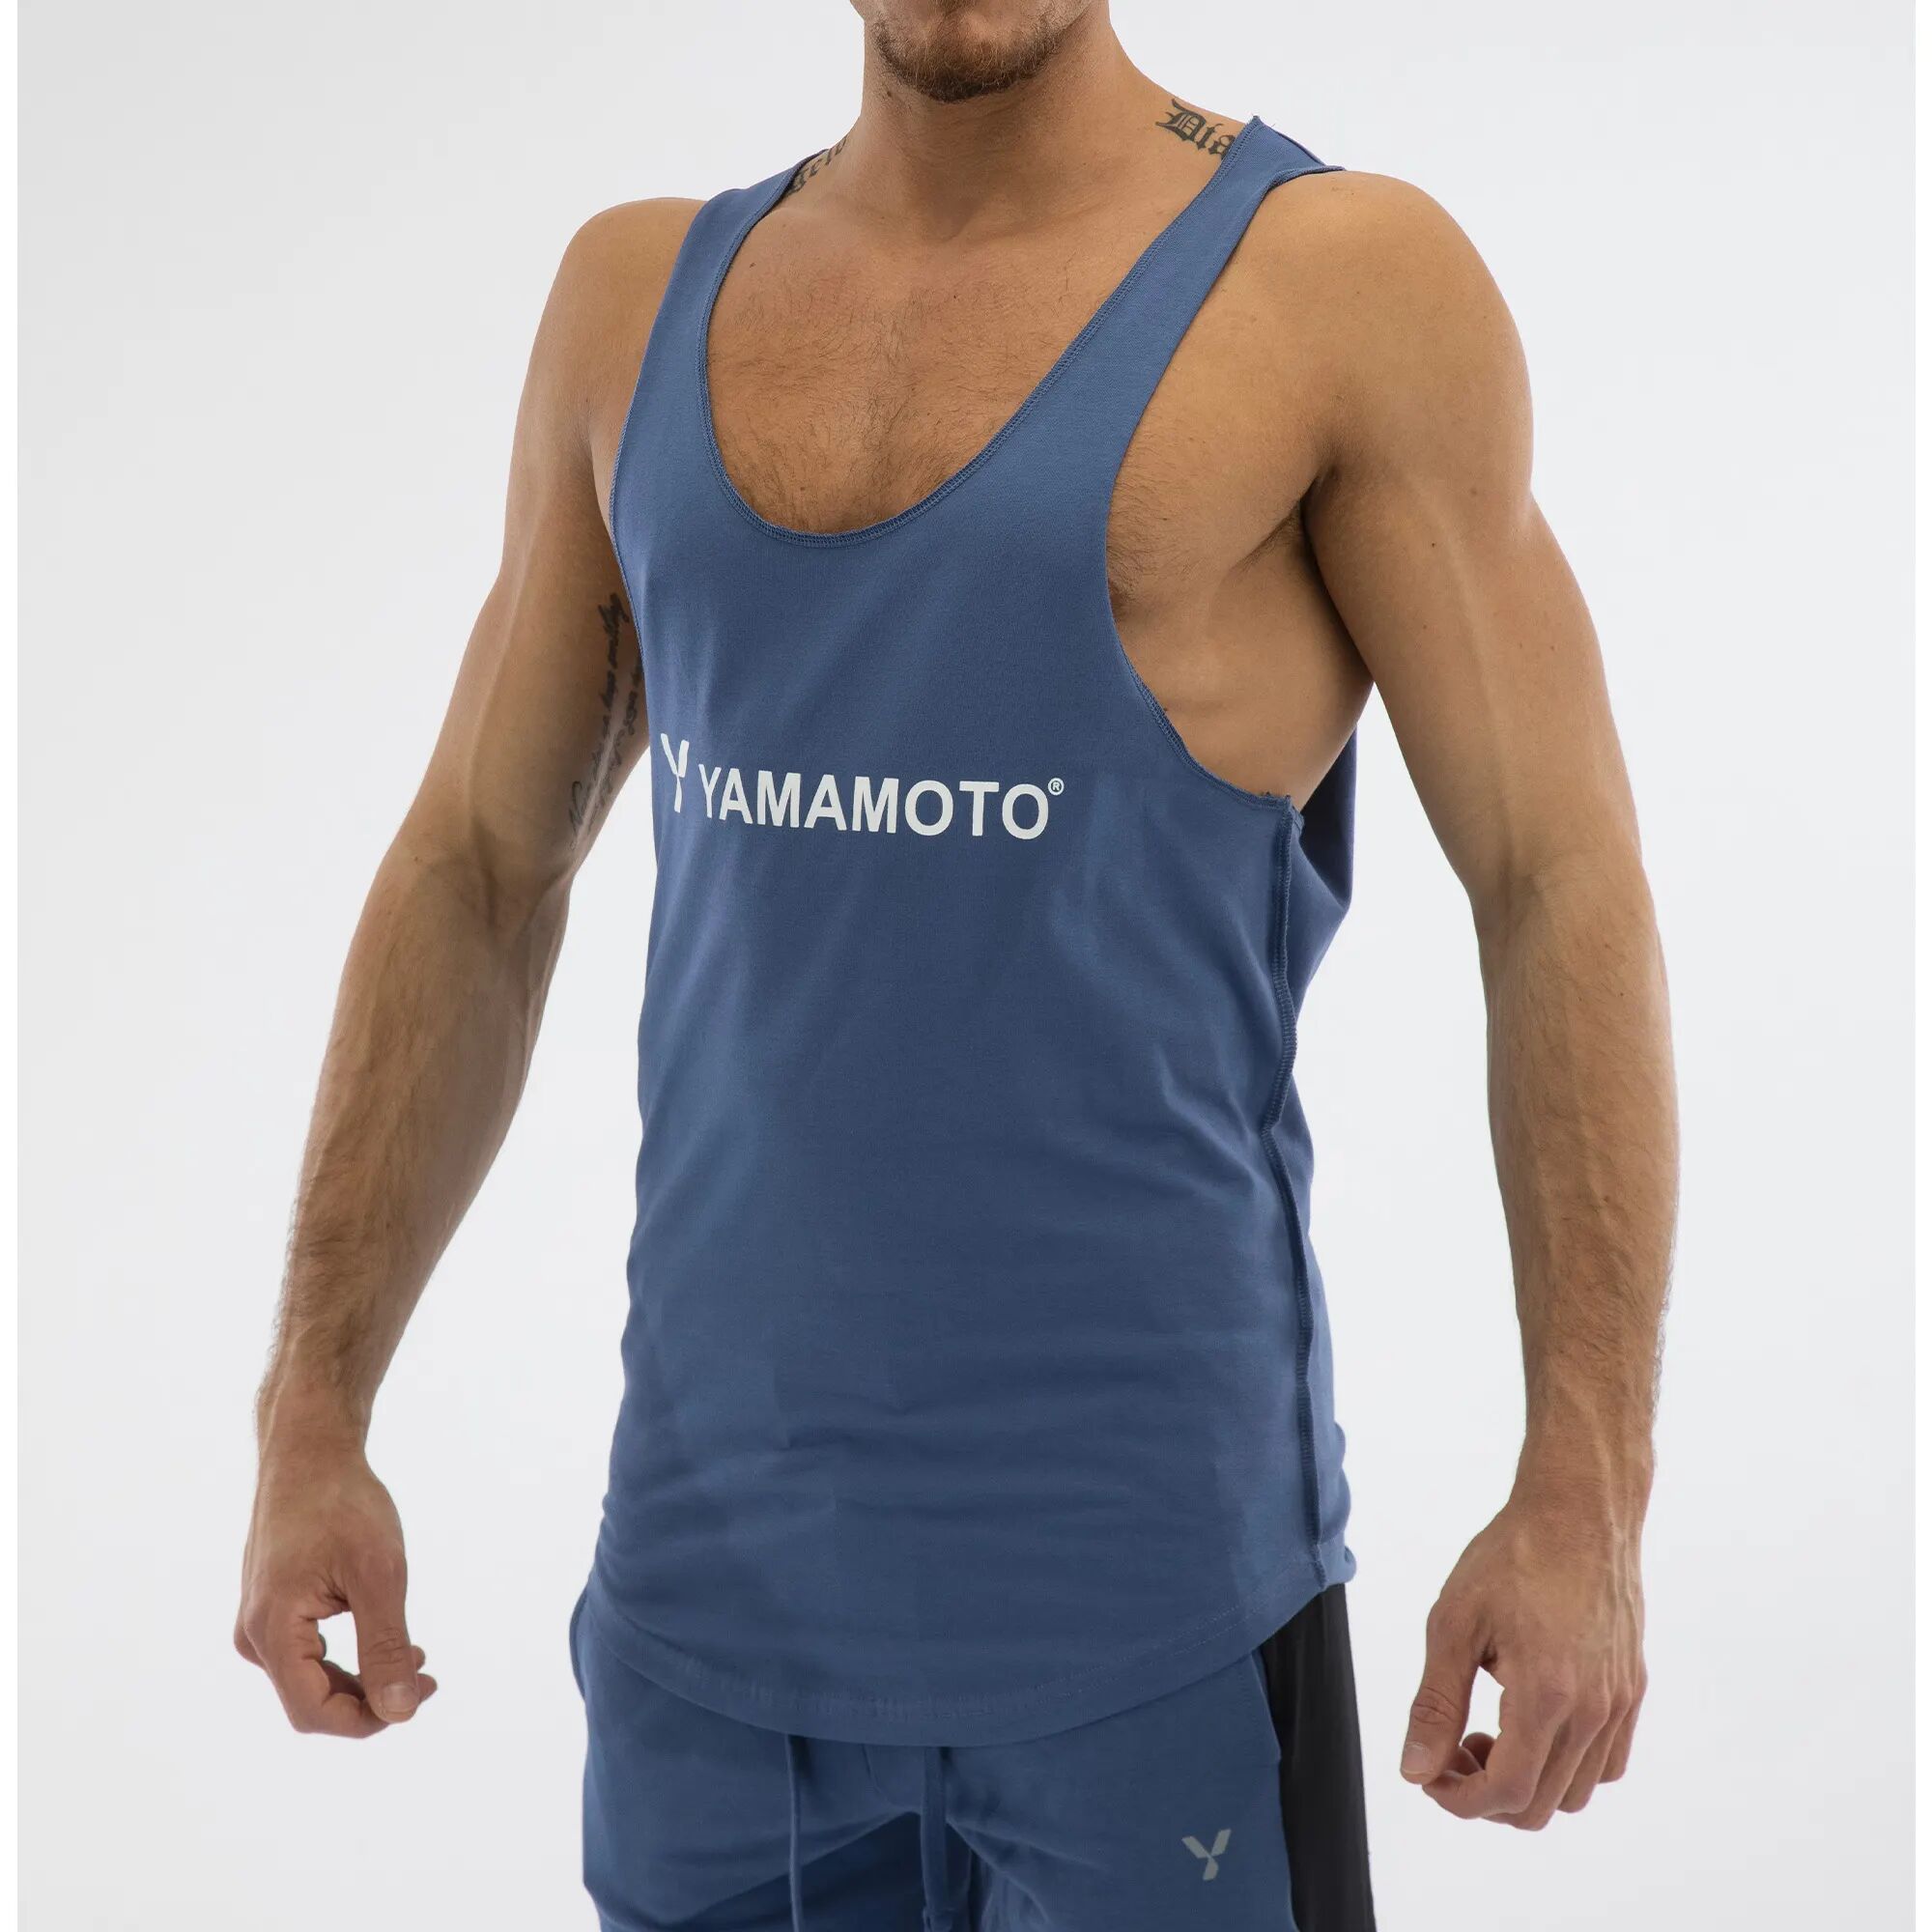 YAMAMOTO OUTFIT Man Tank Top Wide Shoulder Colore: Blu 